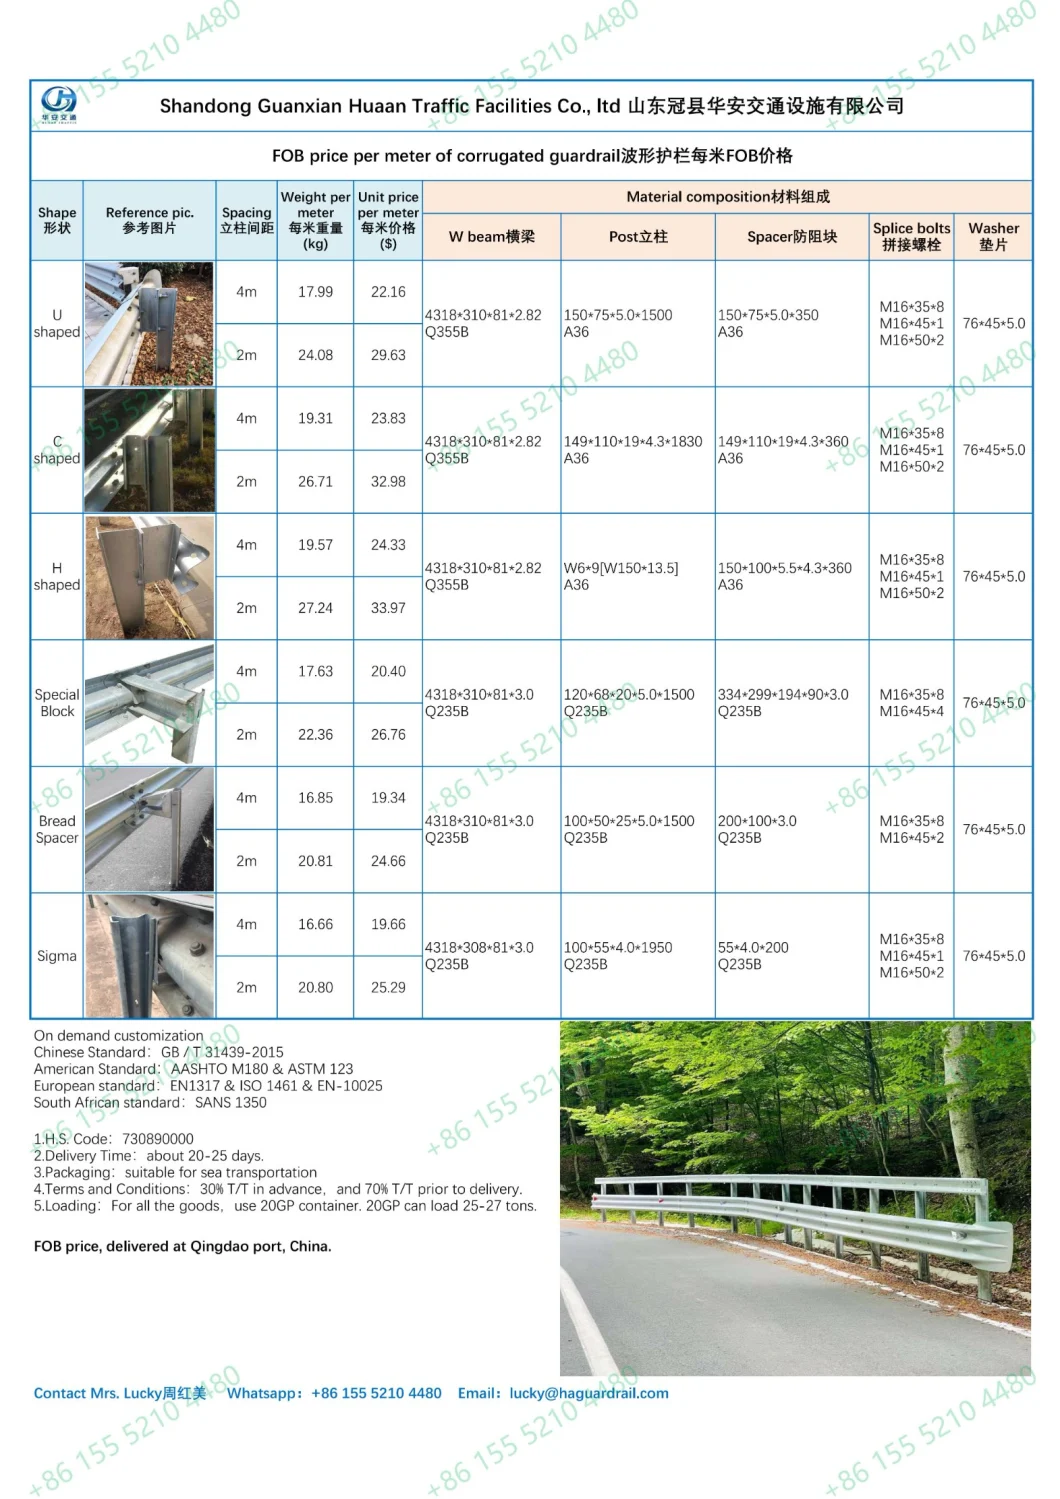 High Quality Stainless Steel Corrugated W Beam Guardrail for Highway